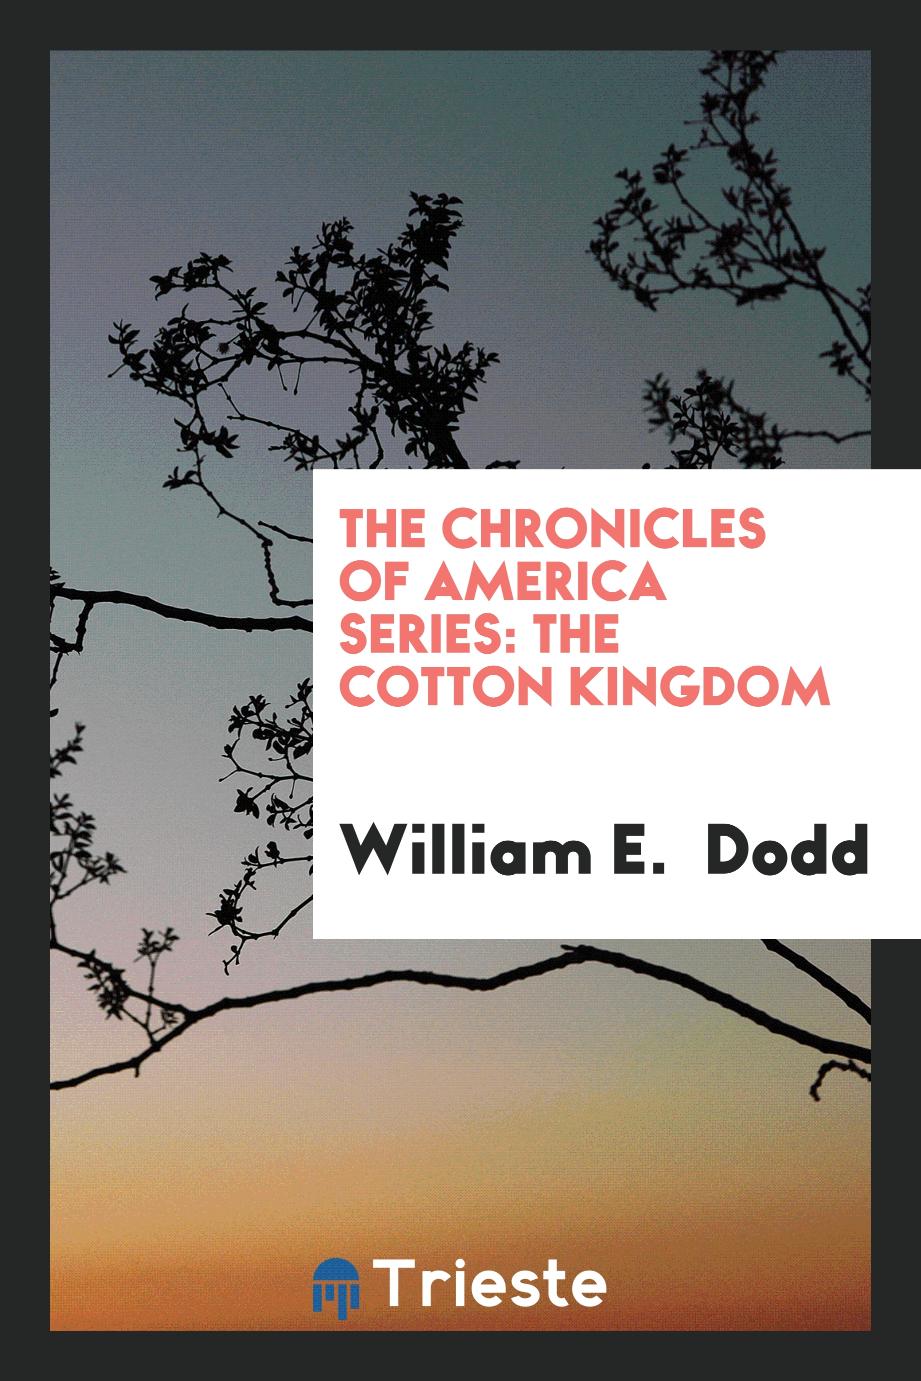 The Chronicles of America Series: The Cotton Kingdom